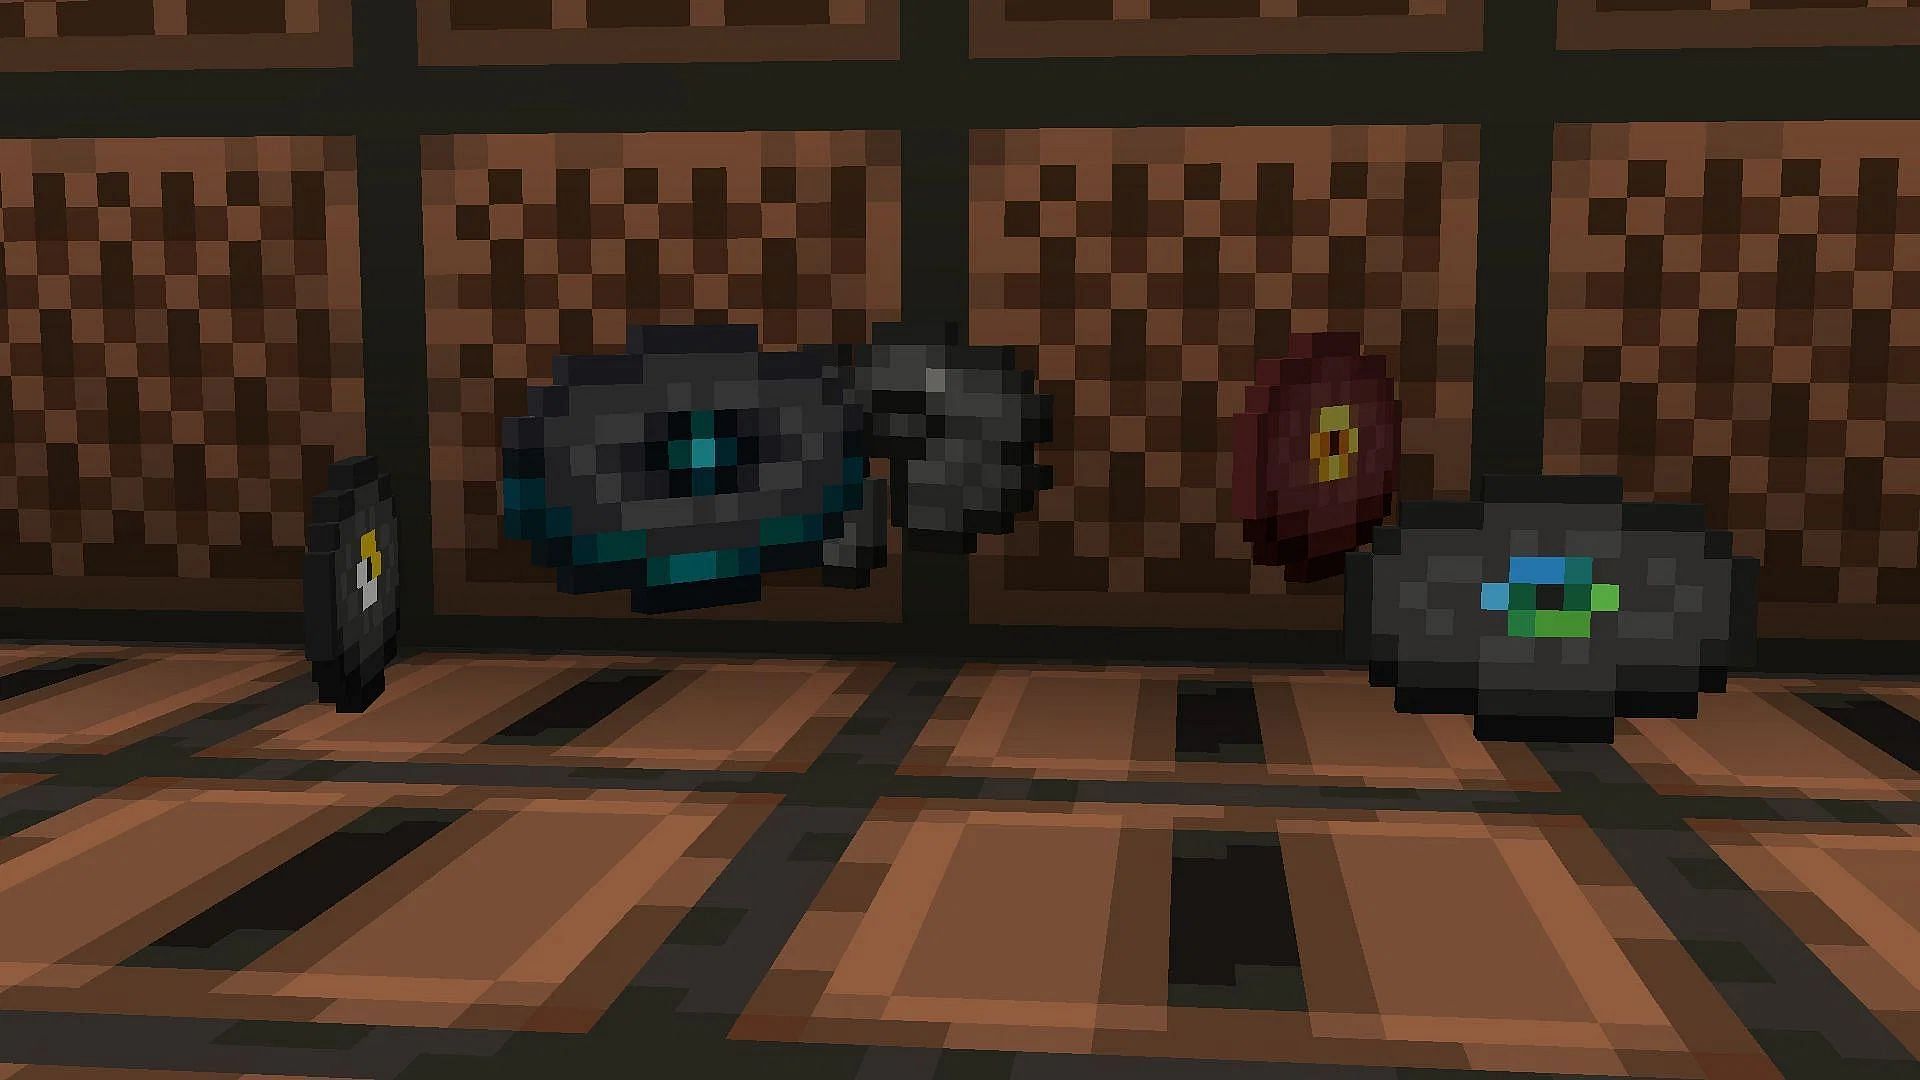 Music discs are also quite rare to find and obtain in Minecraft (Image via Mojang)